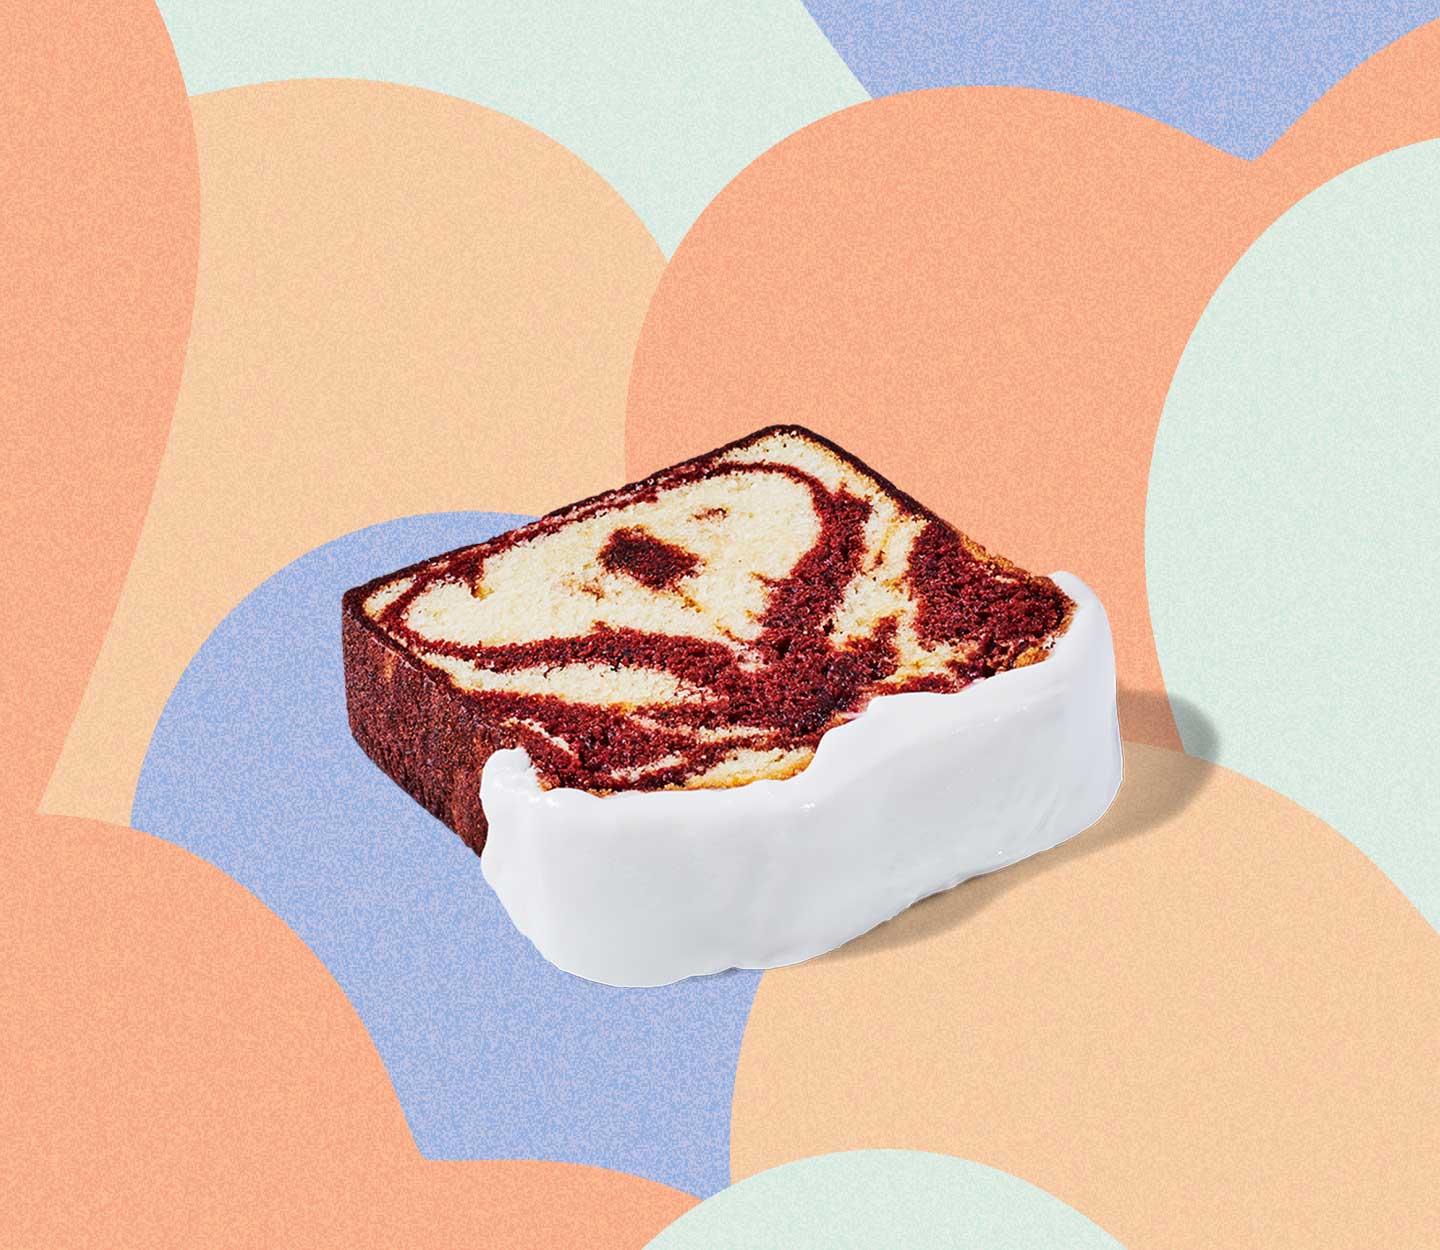 A slice of white cake on its side swirled with red velvet cake, a section of white frosting showing on the end.